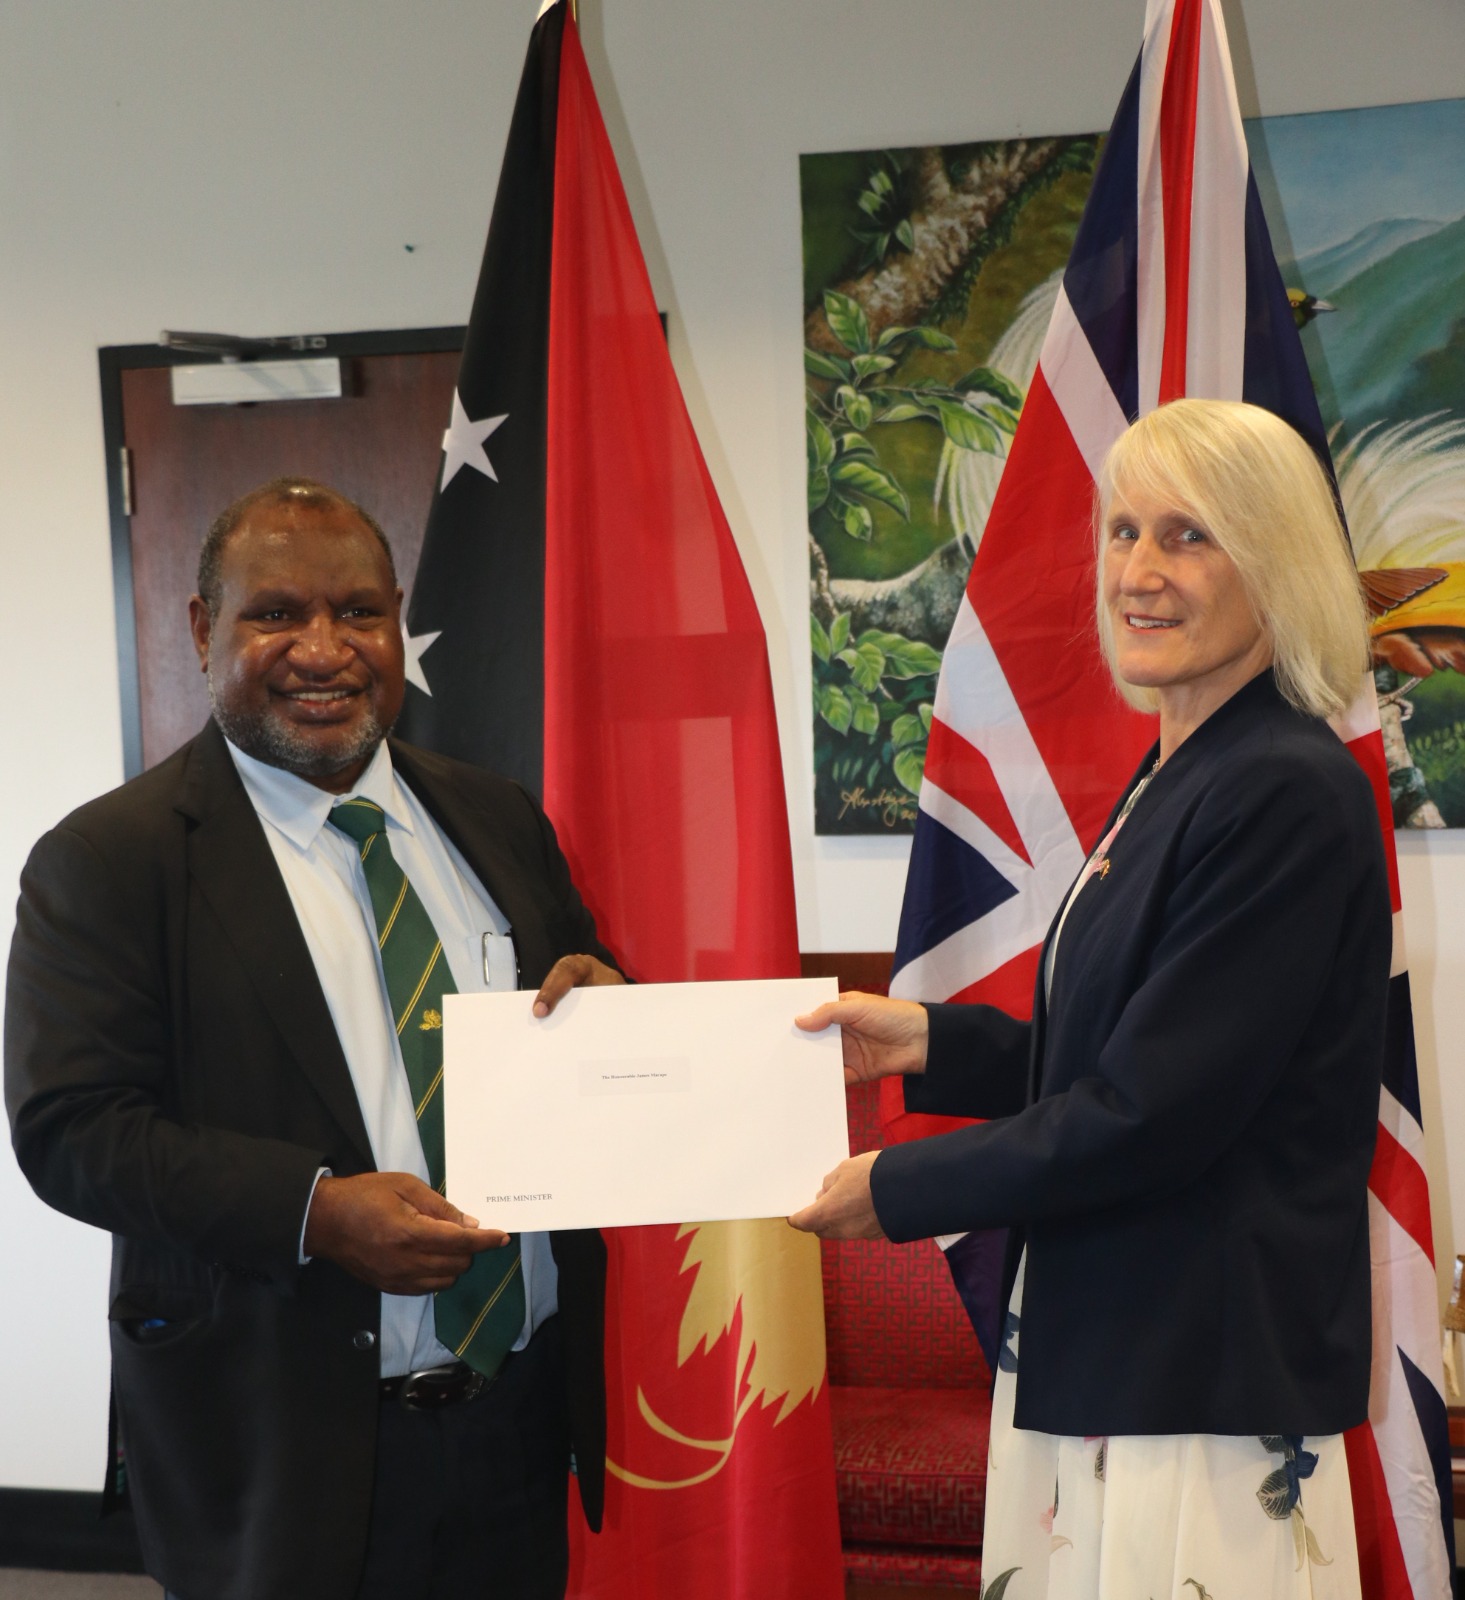 Prime Minister Hon. James Marape Formally Welcomes New British High Commissioner to Papua New Guinea, H.E. Ms. Angela Macro